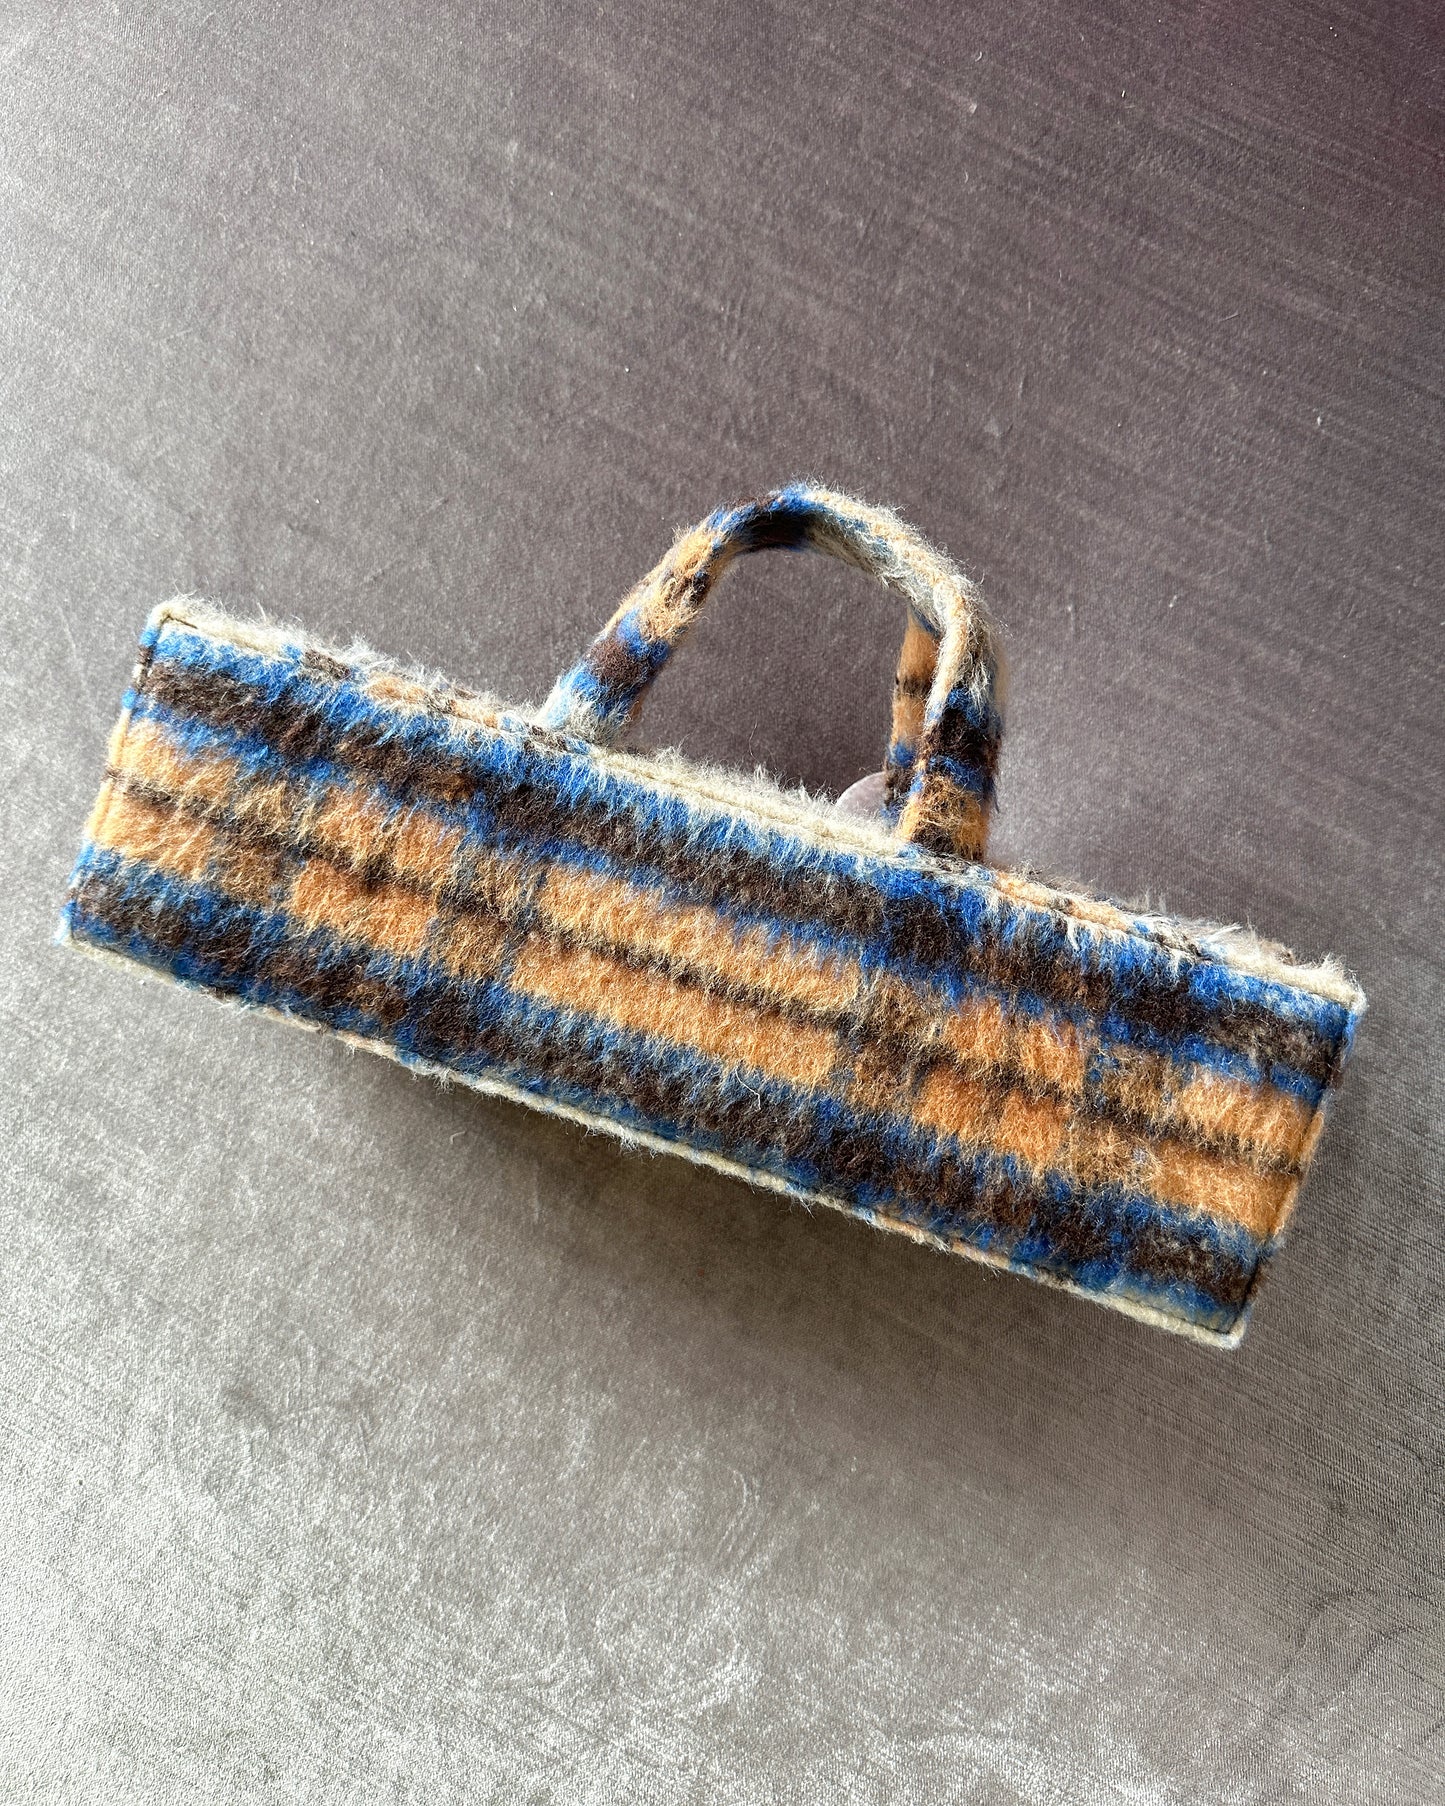 Rectangular mohair check print blue, brown, and orange bag with five assorted metal and ceramic hardware embellishments. 